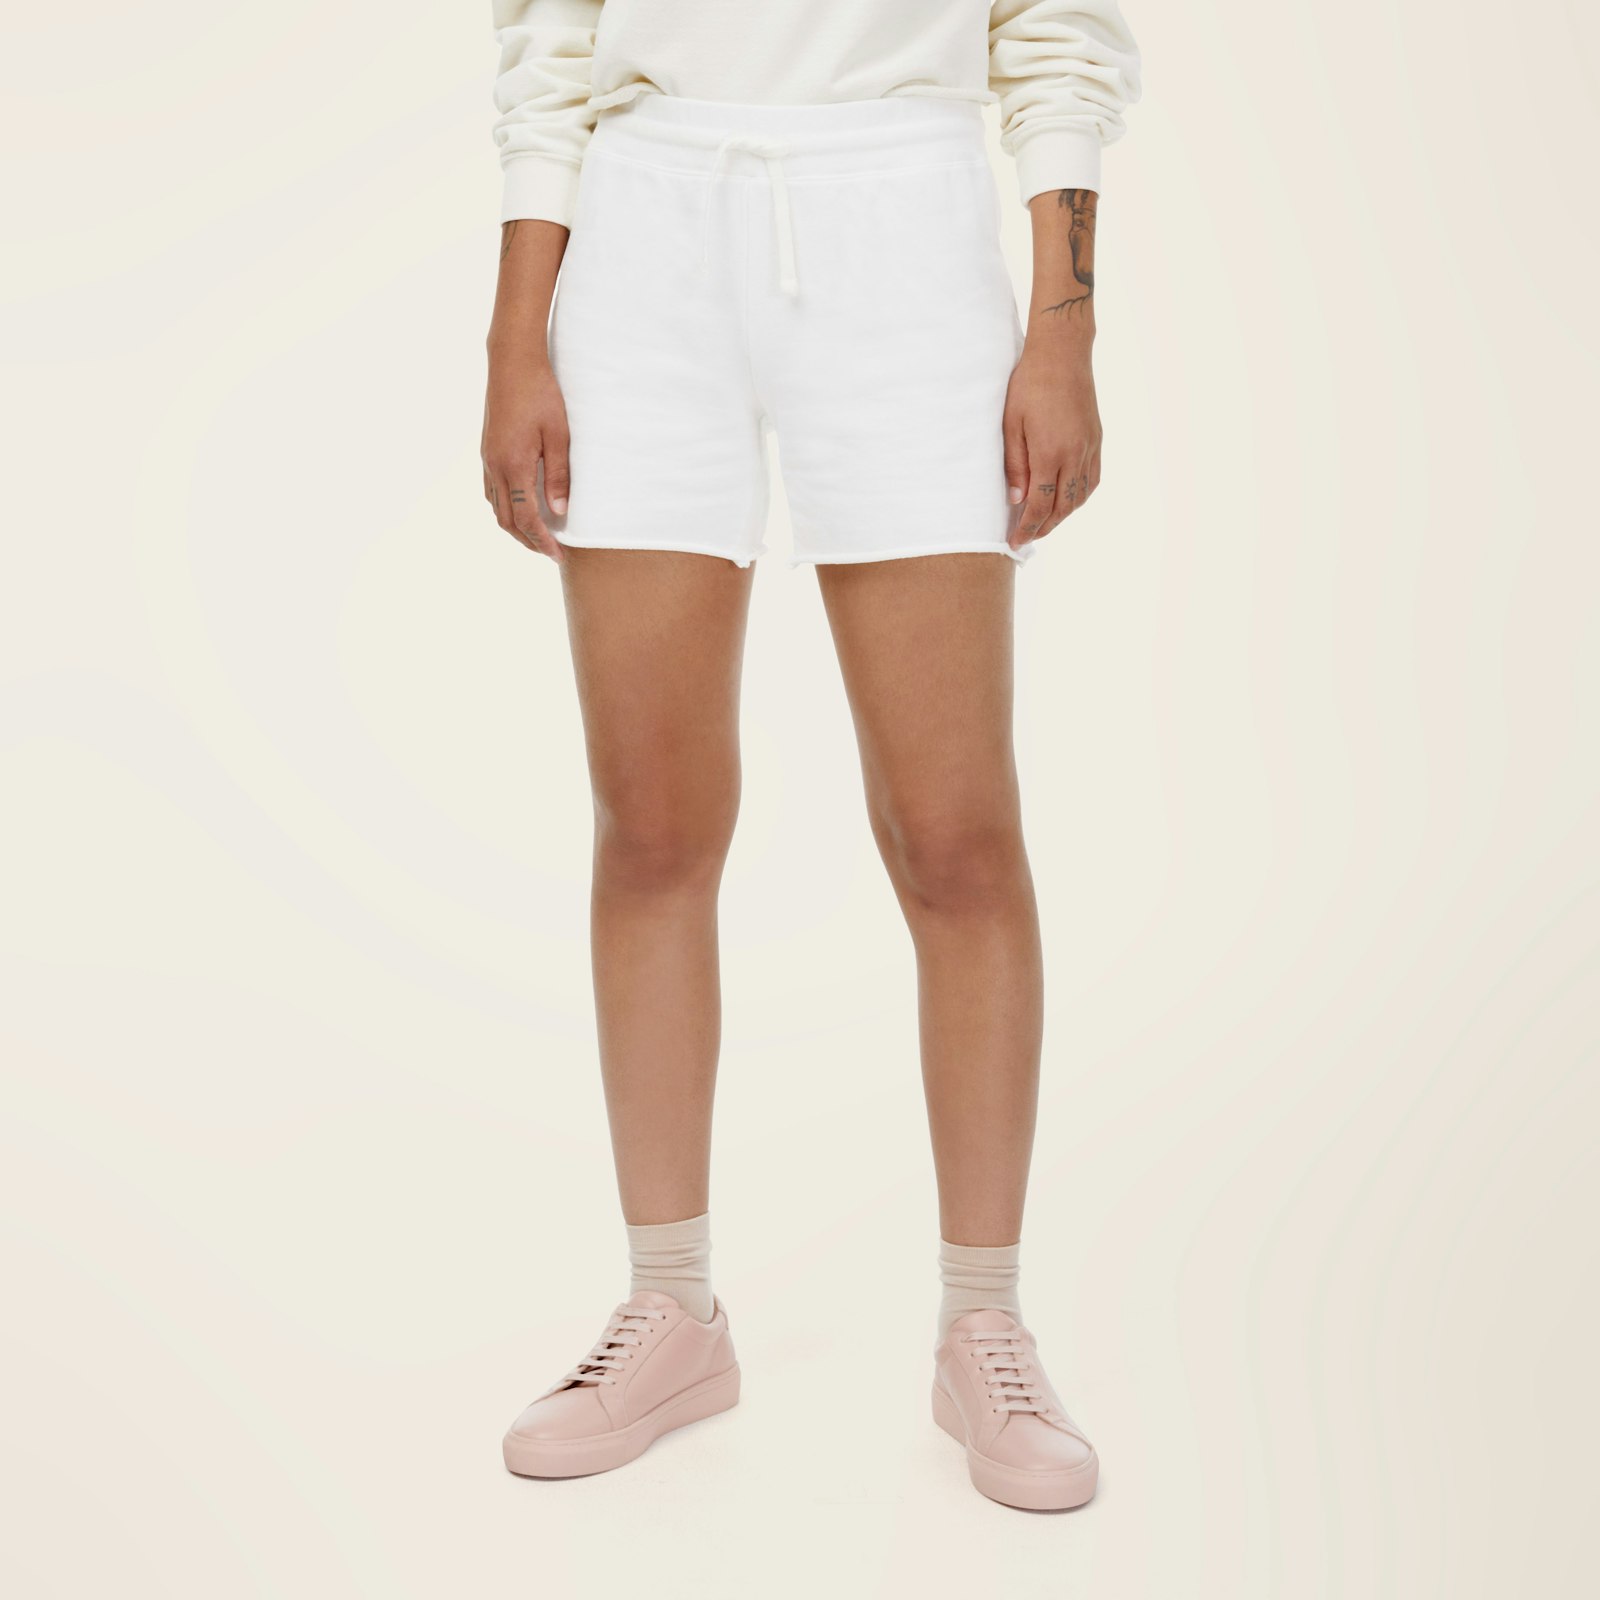 RecycledTerryShorts_OffWhite_Womens_OnFigure_1x1_0901.jpg